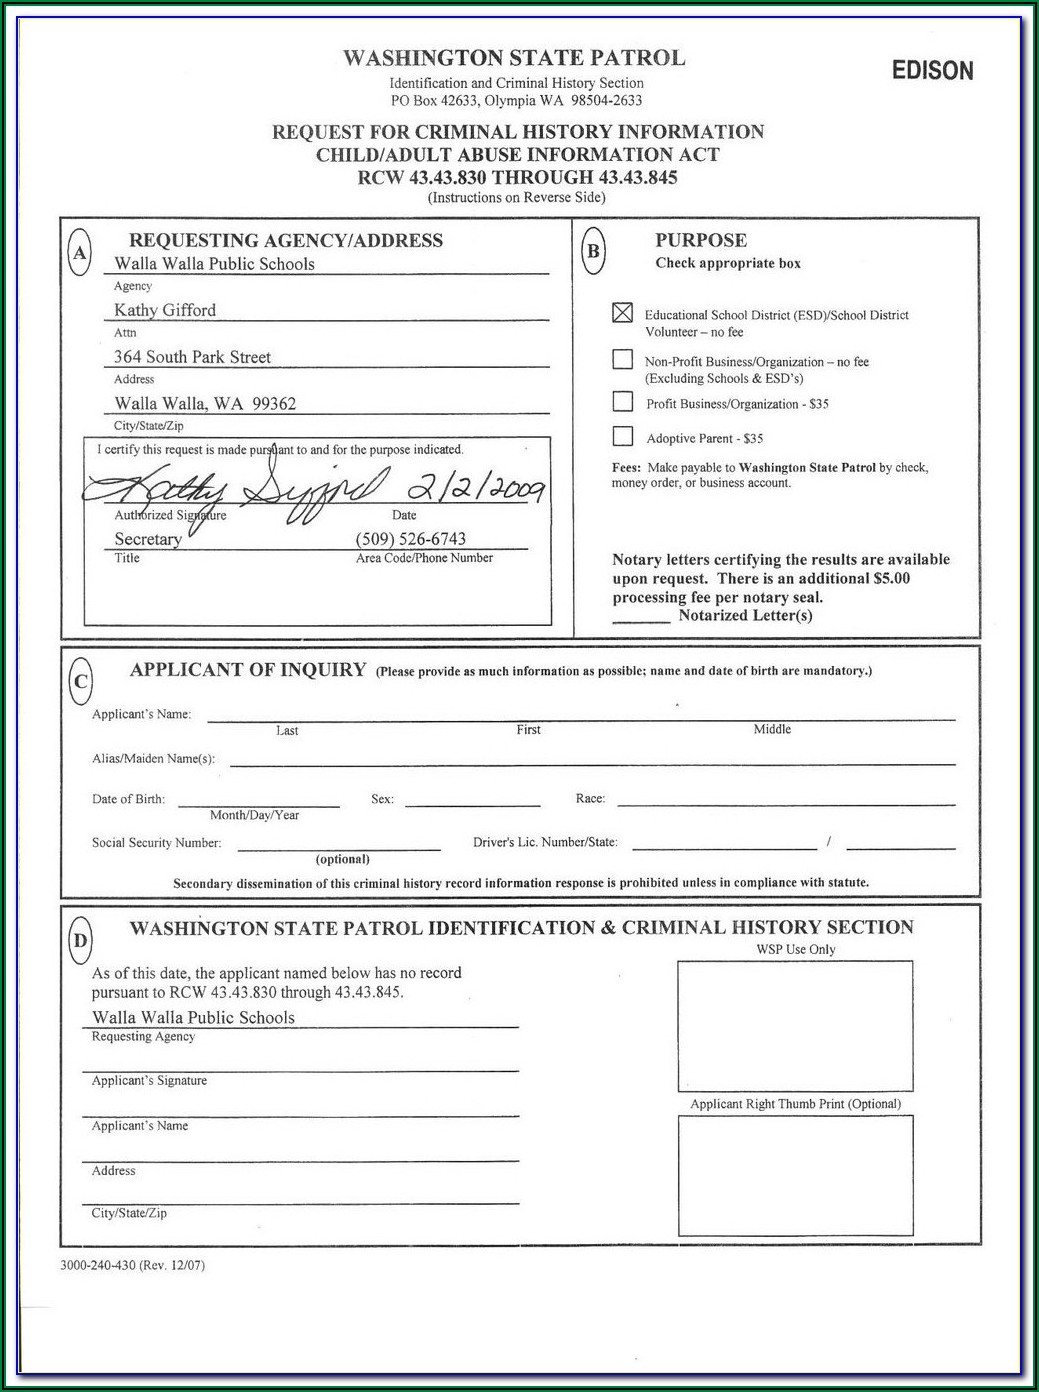 Thurston County Divorce Forms